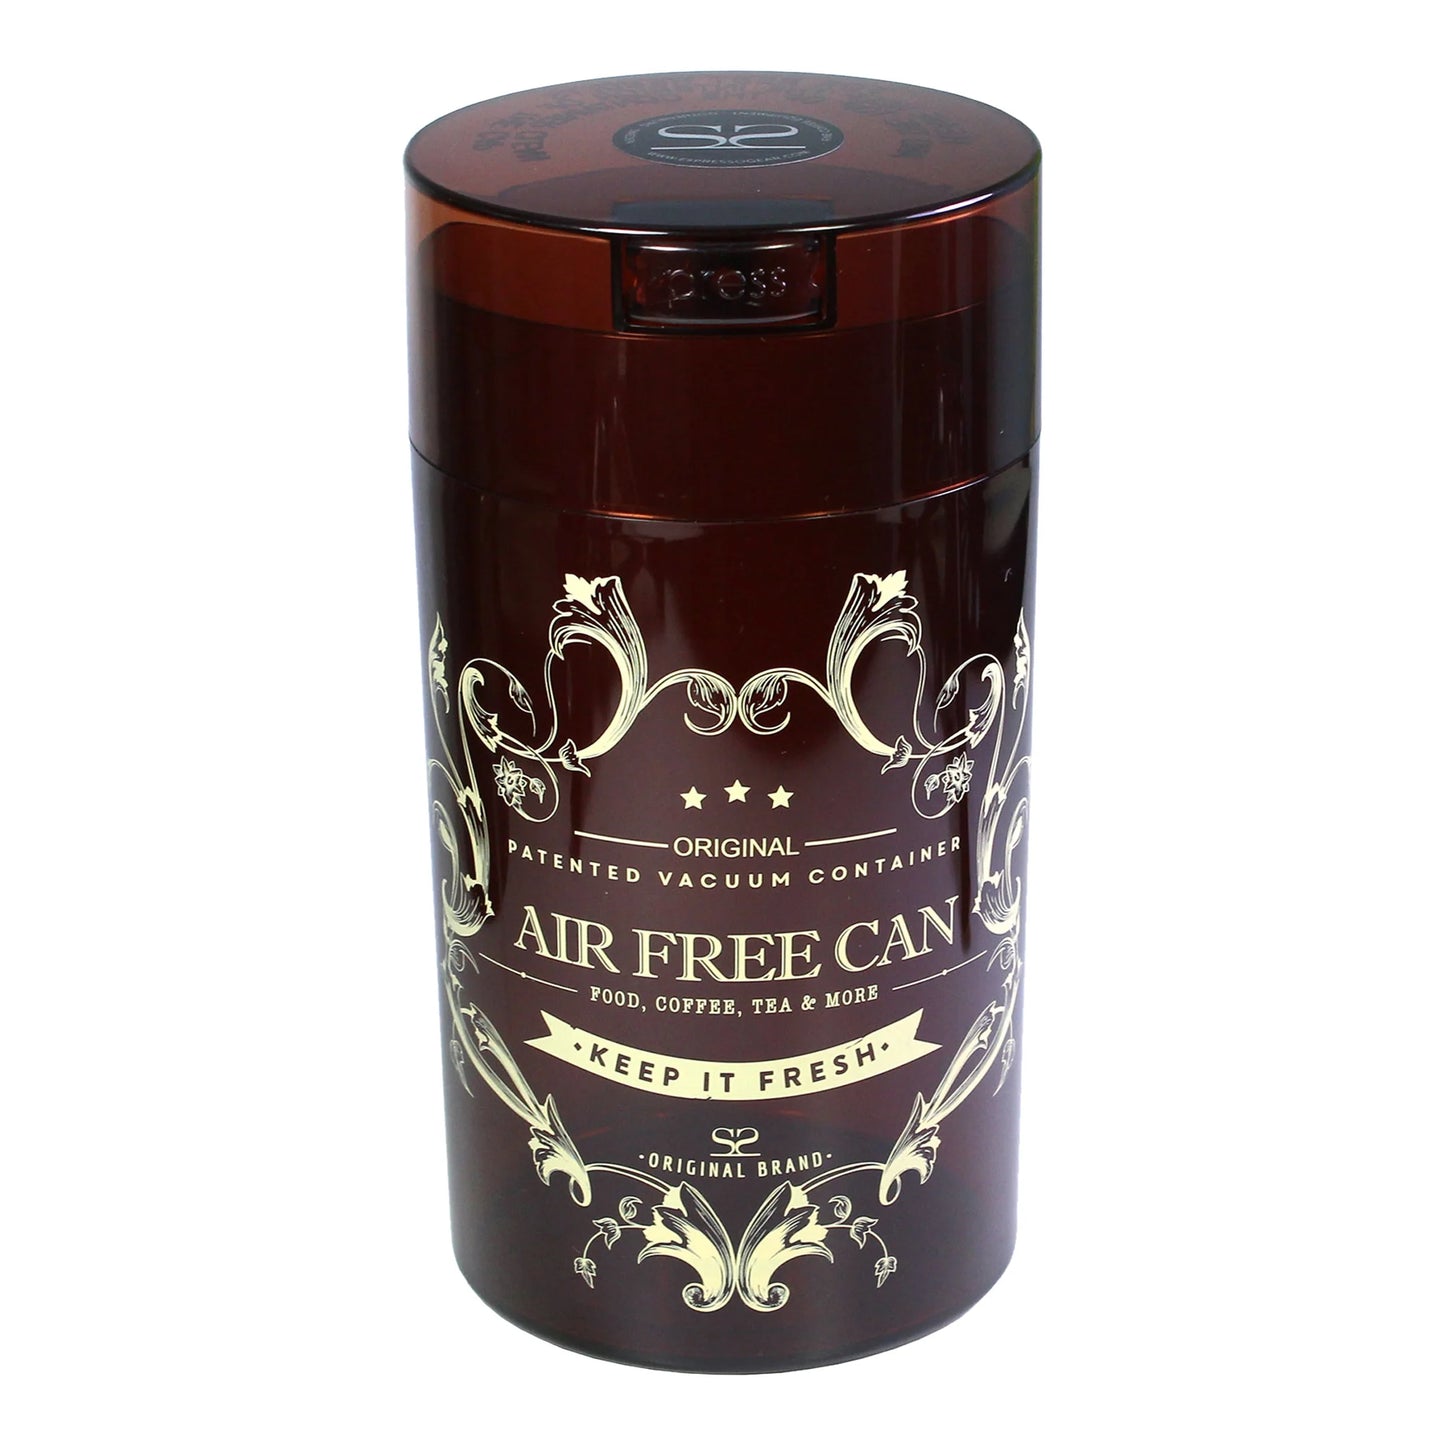 Vacuum container for storing coffee, 250g, amber color